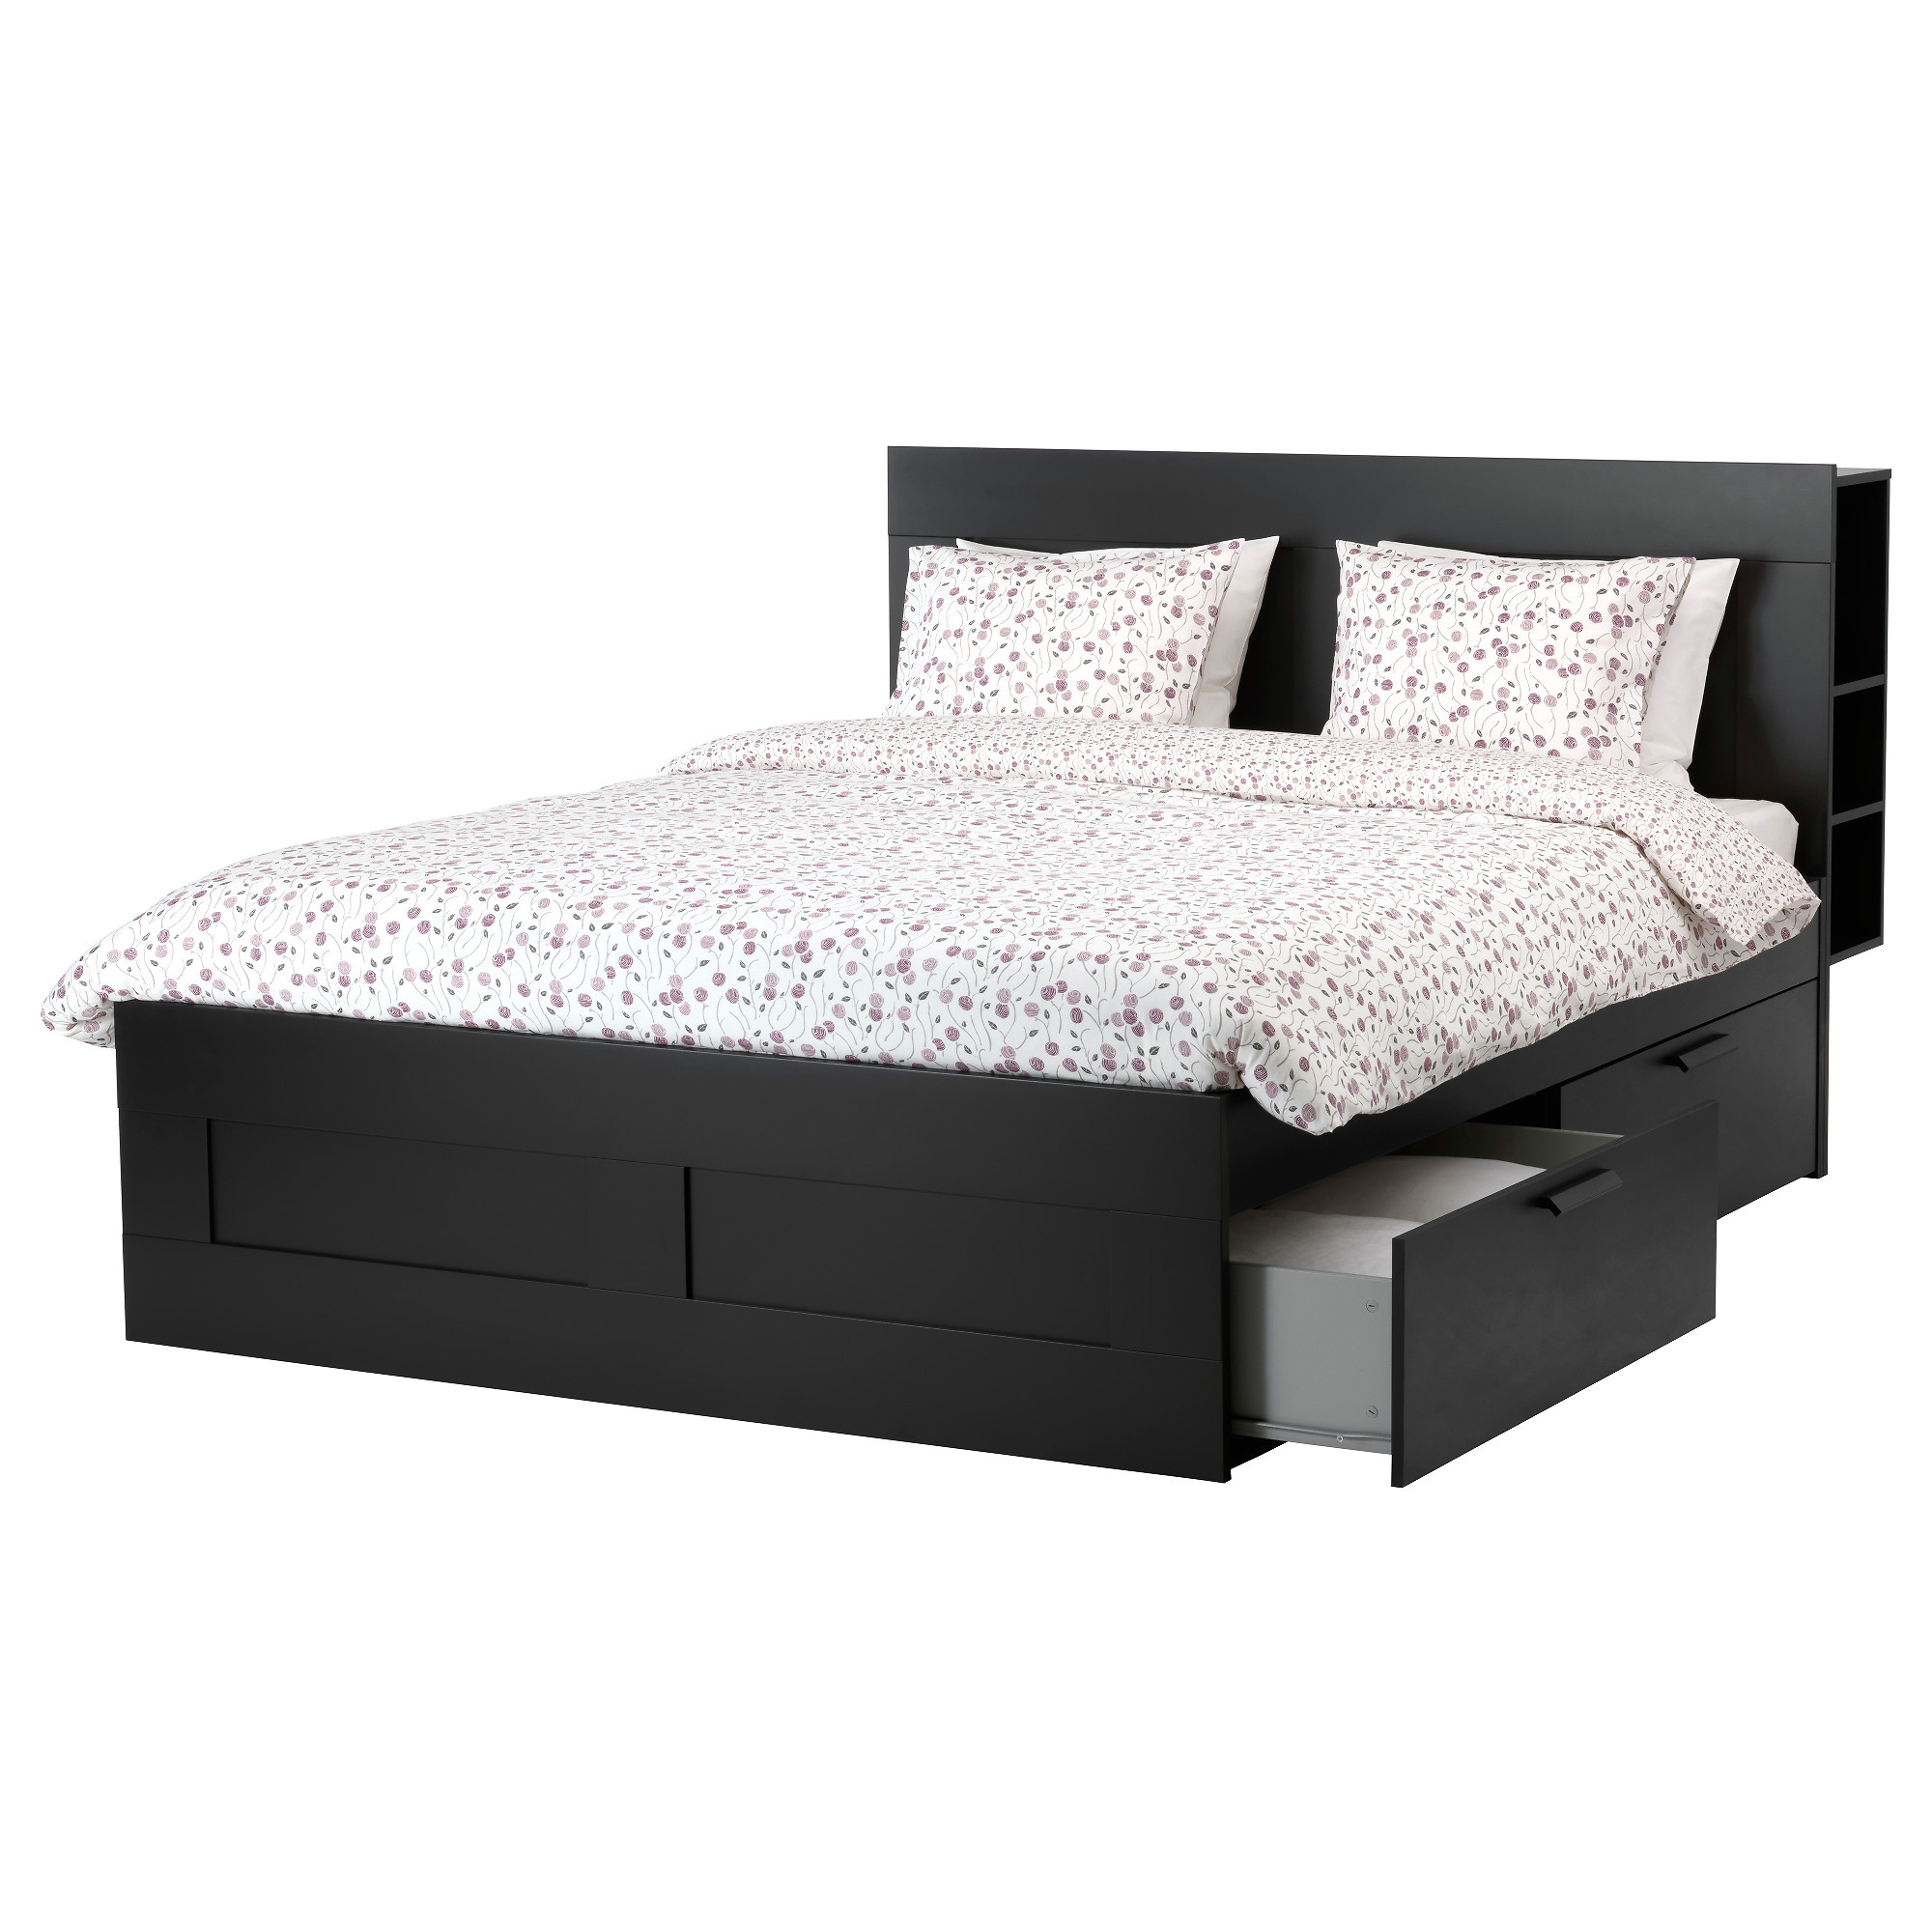 winsome queen bed frame and mattress set decor with storage style brimnes bed frame with storage